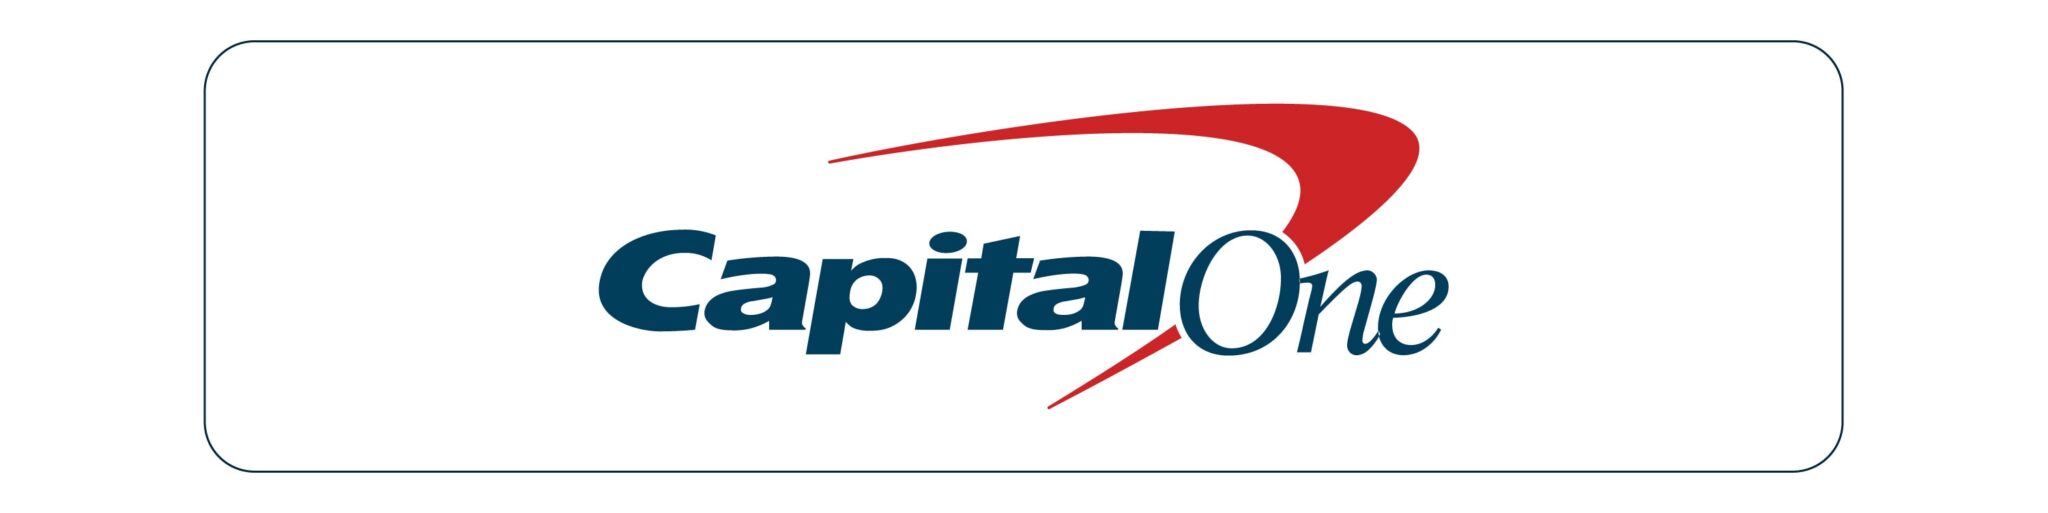 Top 3 Mobile Banking Apps: Capital One Mobile